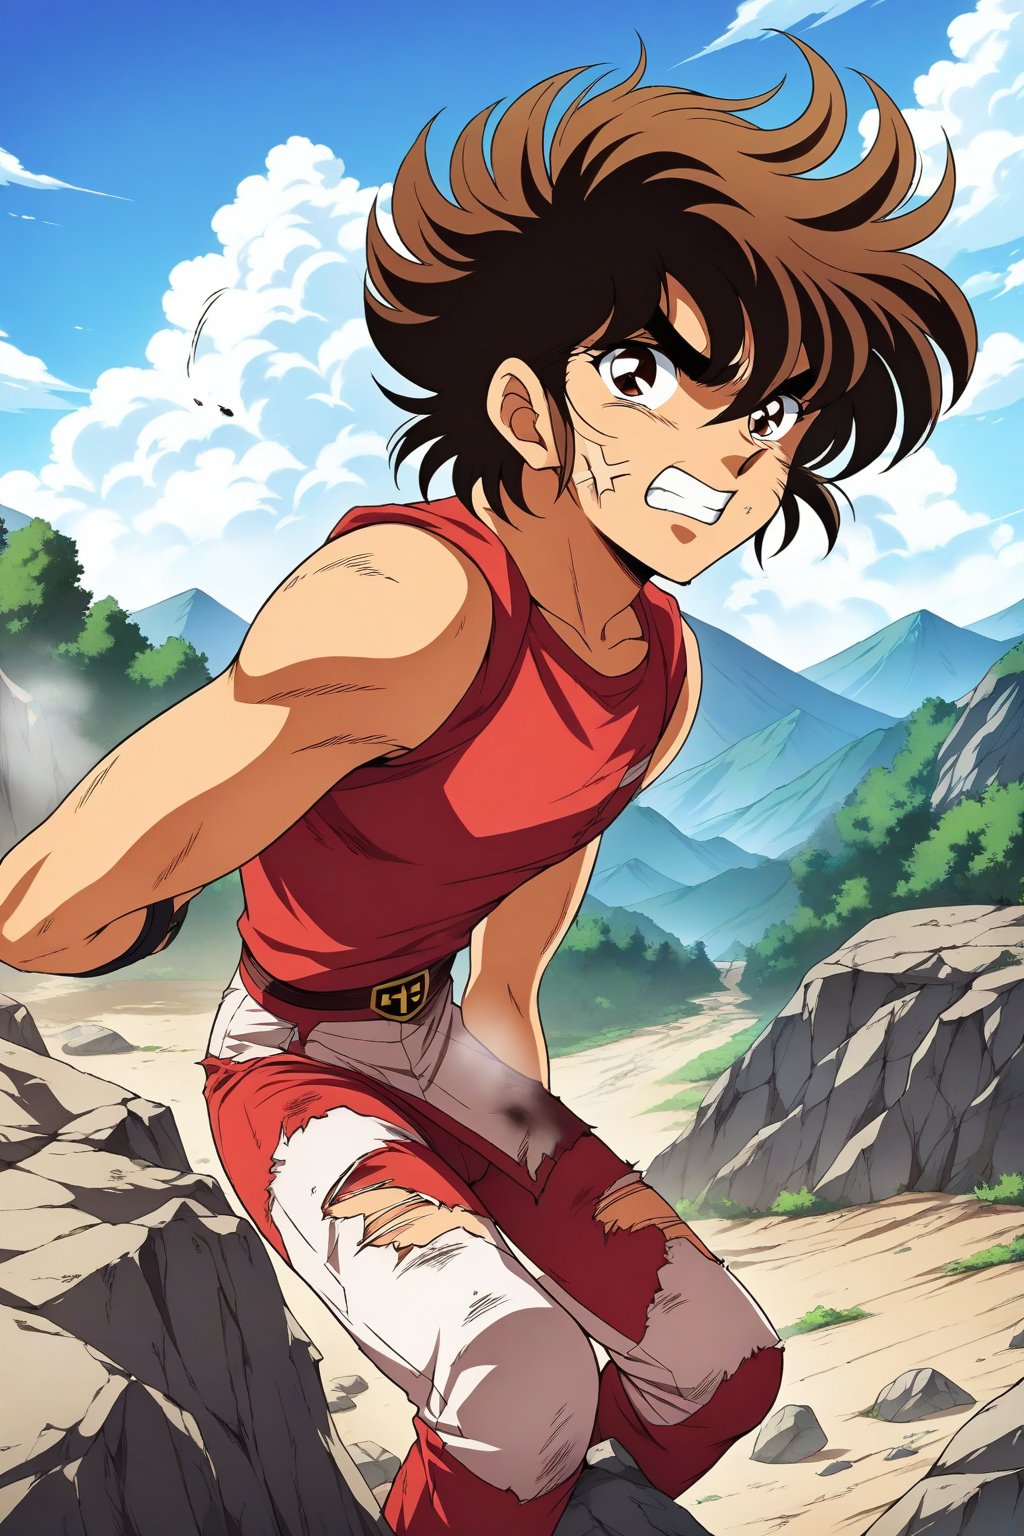 (masterpiece, best quality, ultra HD anime quality, super high resolution, 1980s/(style), retro, anatomically accurate, perfect anatomy), (side view, bottom angle), looking at the camera, (Seiya Pegasus, male, (Pegasus cross, damaged)), 1 male, solo, brown hair, short hair, bangs between eyes, messy hair, brown eyes, angry face, cut on cheek), heavy breathing, excited, (red underwear, tattered, red underwear pants, tattered), (poised, low body position, legs wide apart, one foot forward), (mountain scenery, mountain path, barren land, large rocks, cliff), score_9, score_8_up, score_7_up, score_6_up